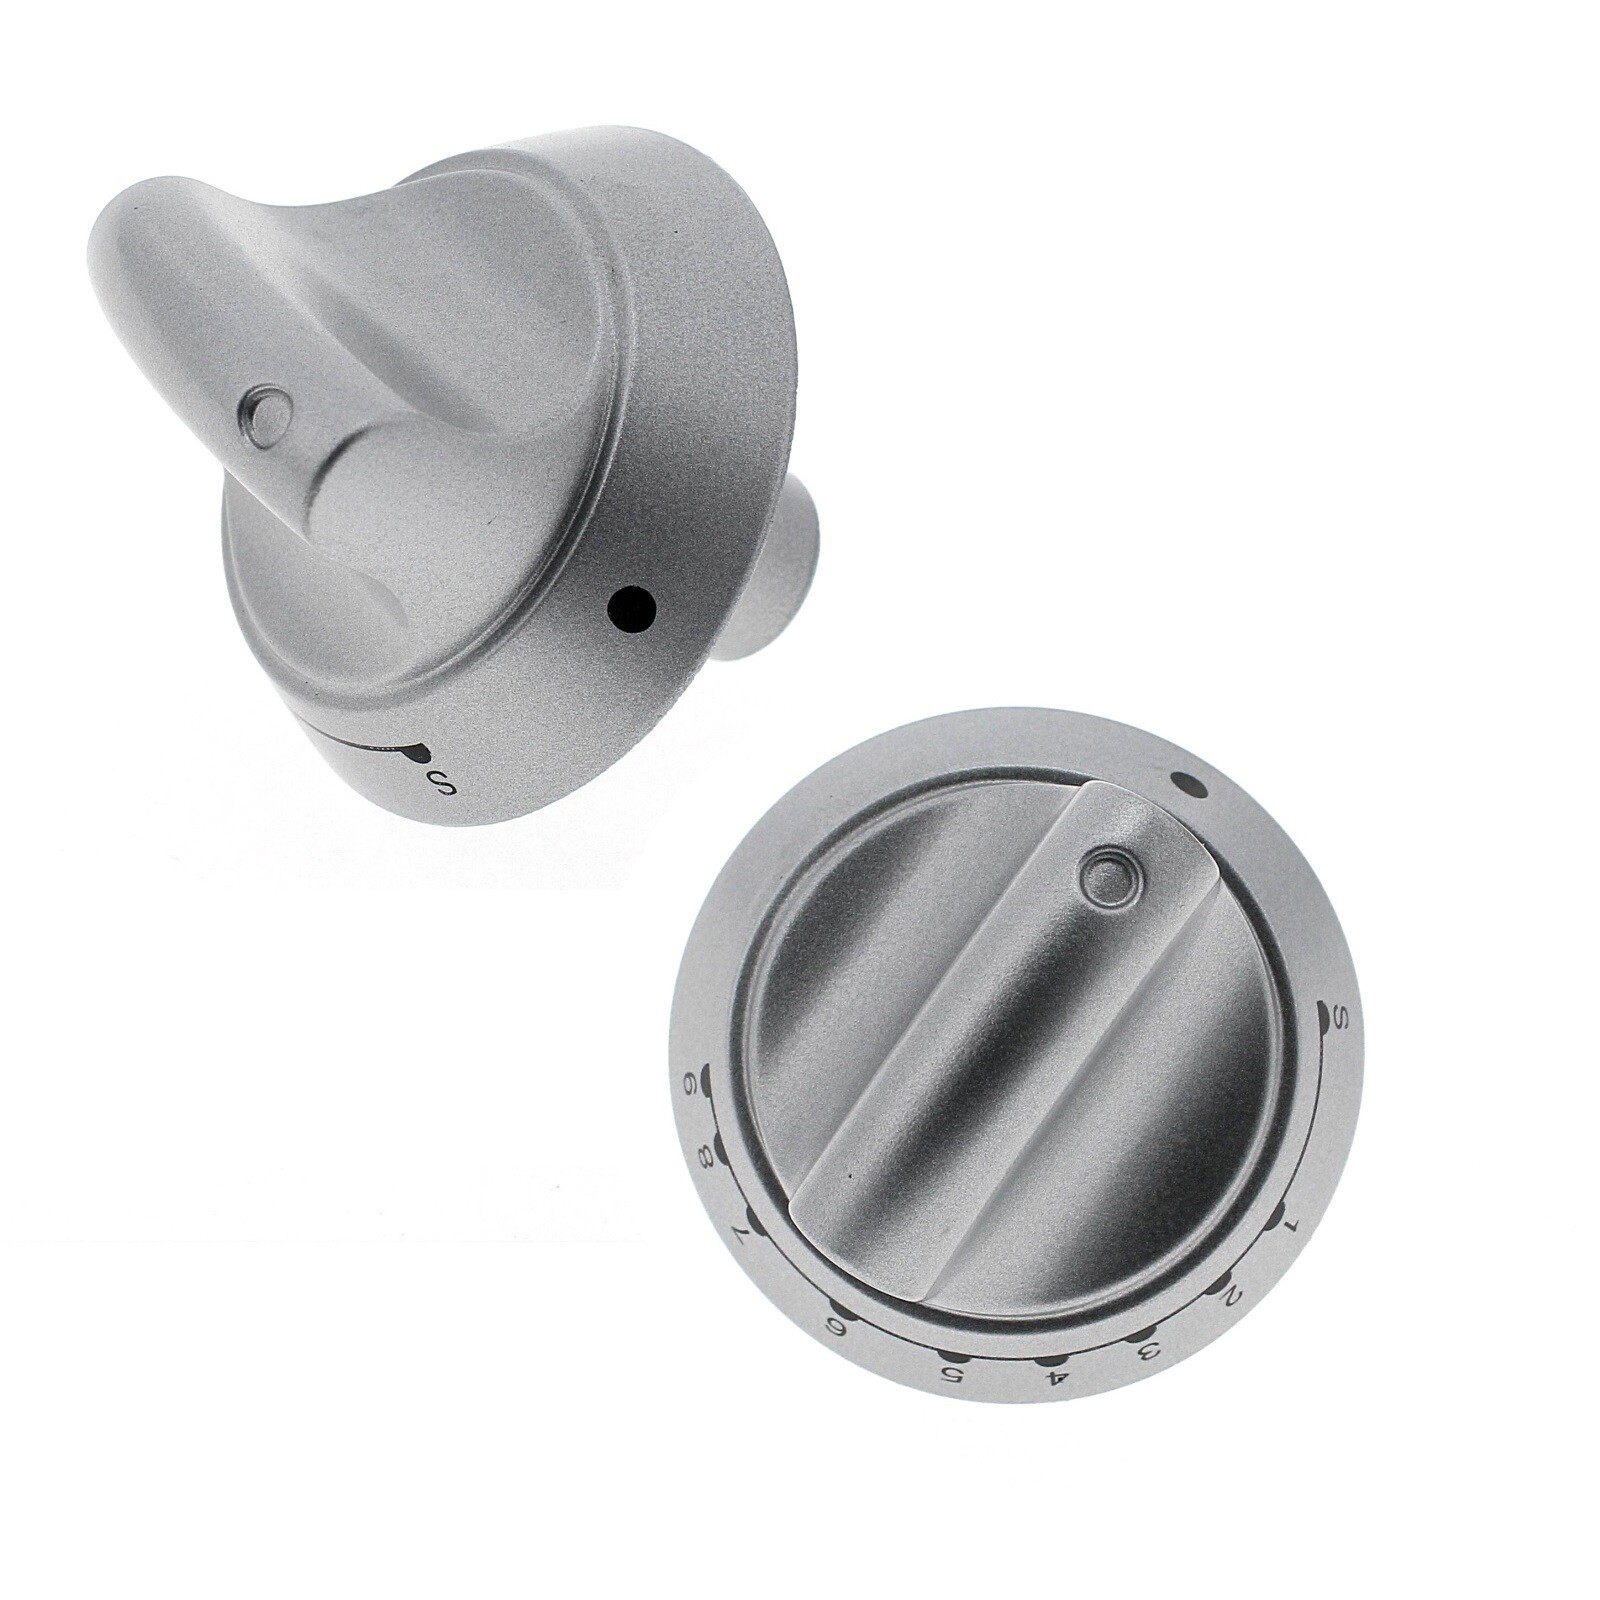 hotpoint stove oven knob replacement